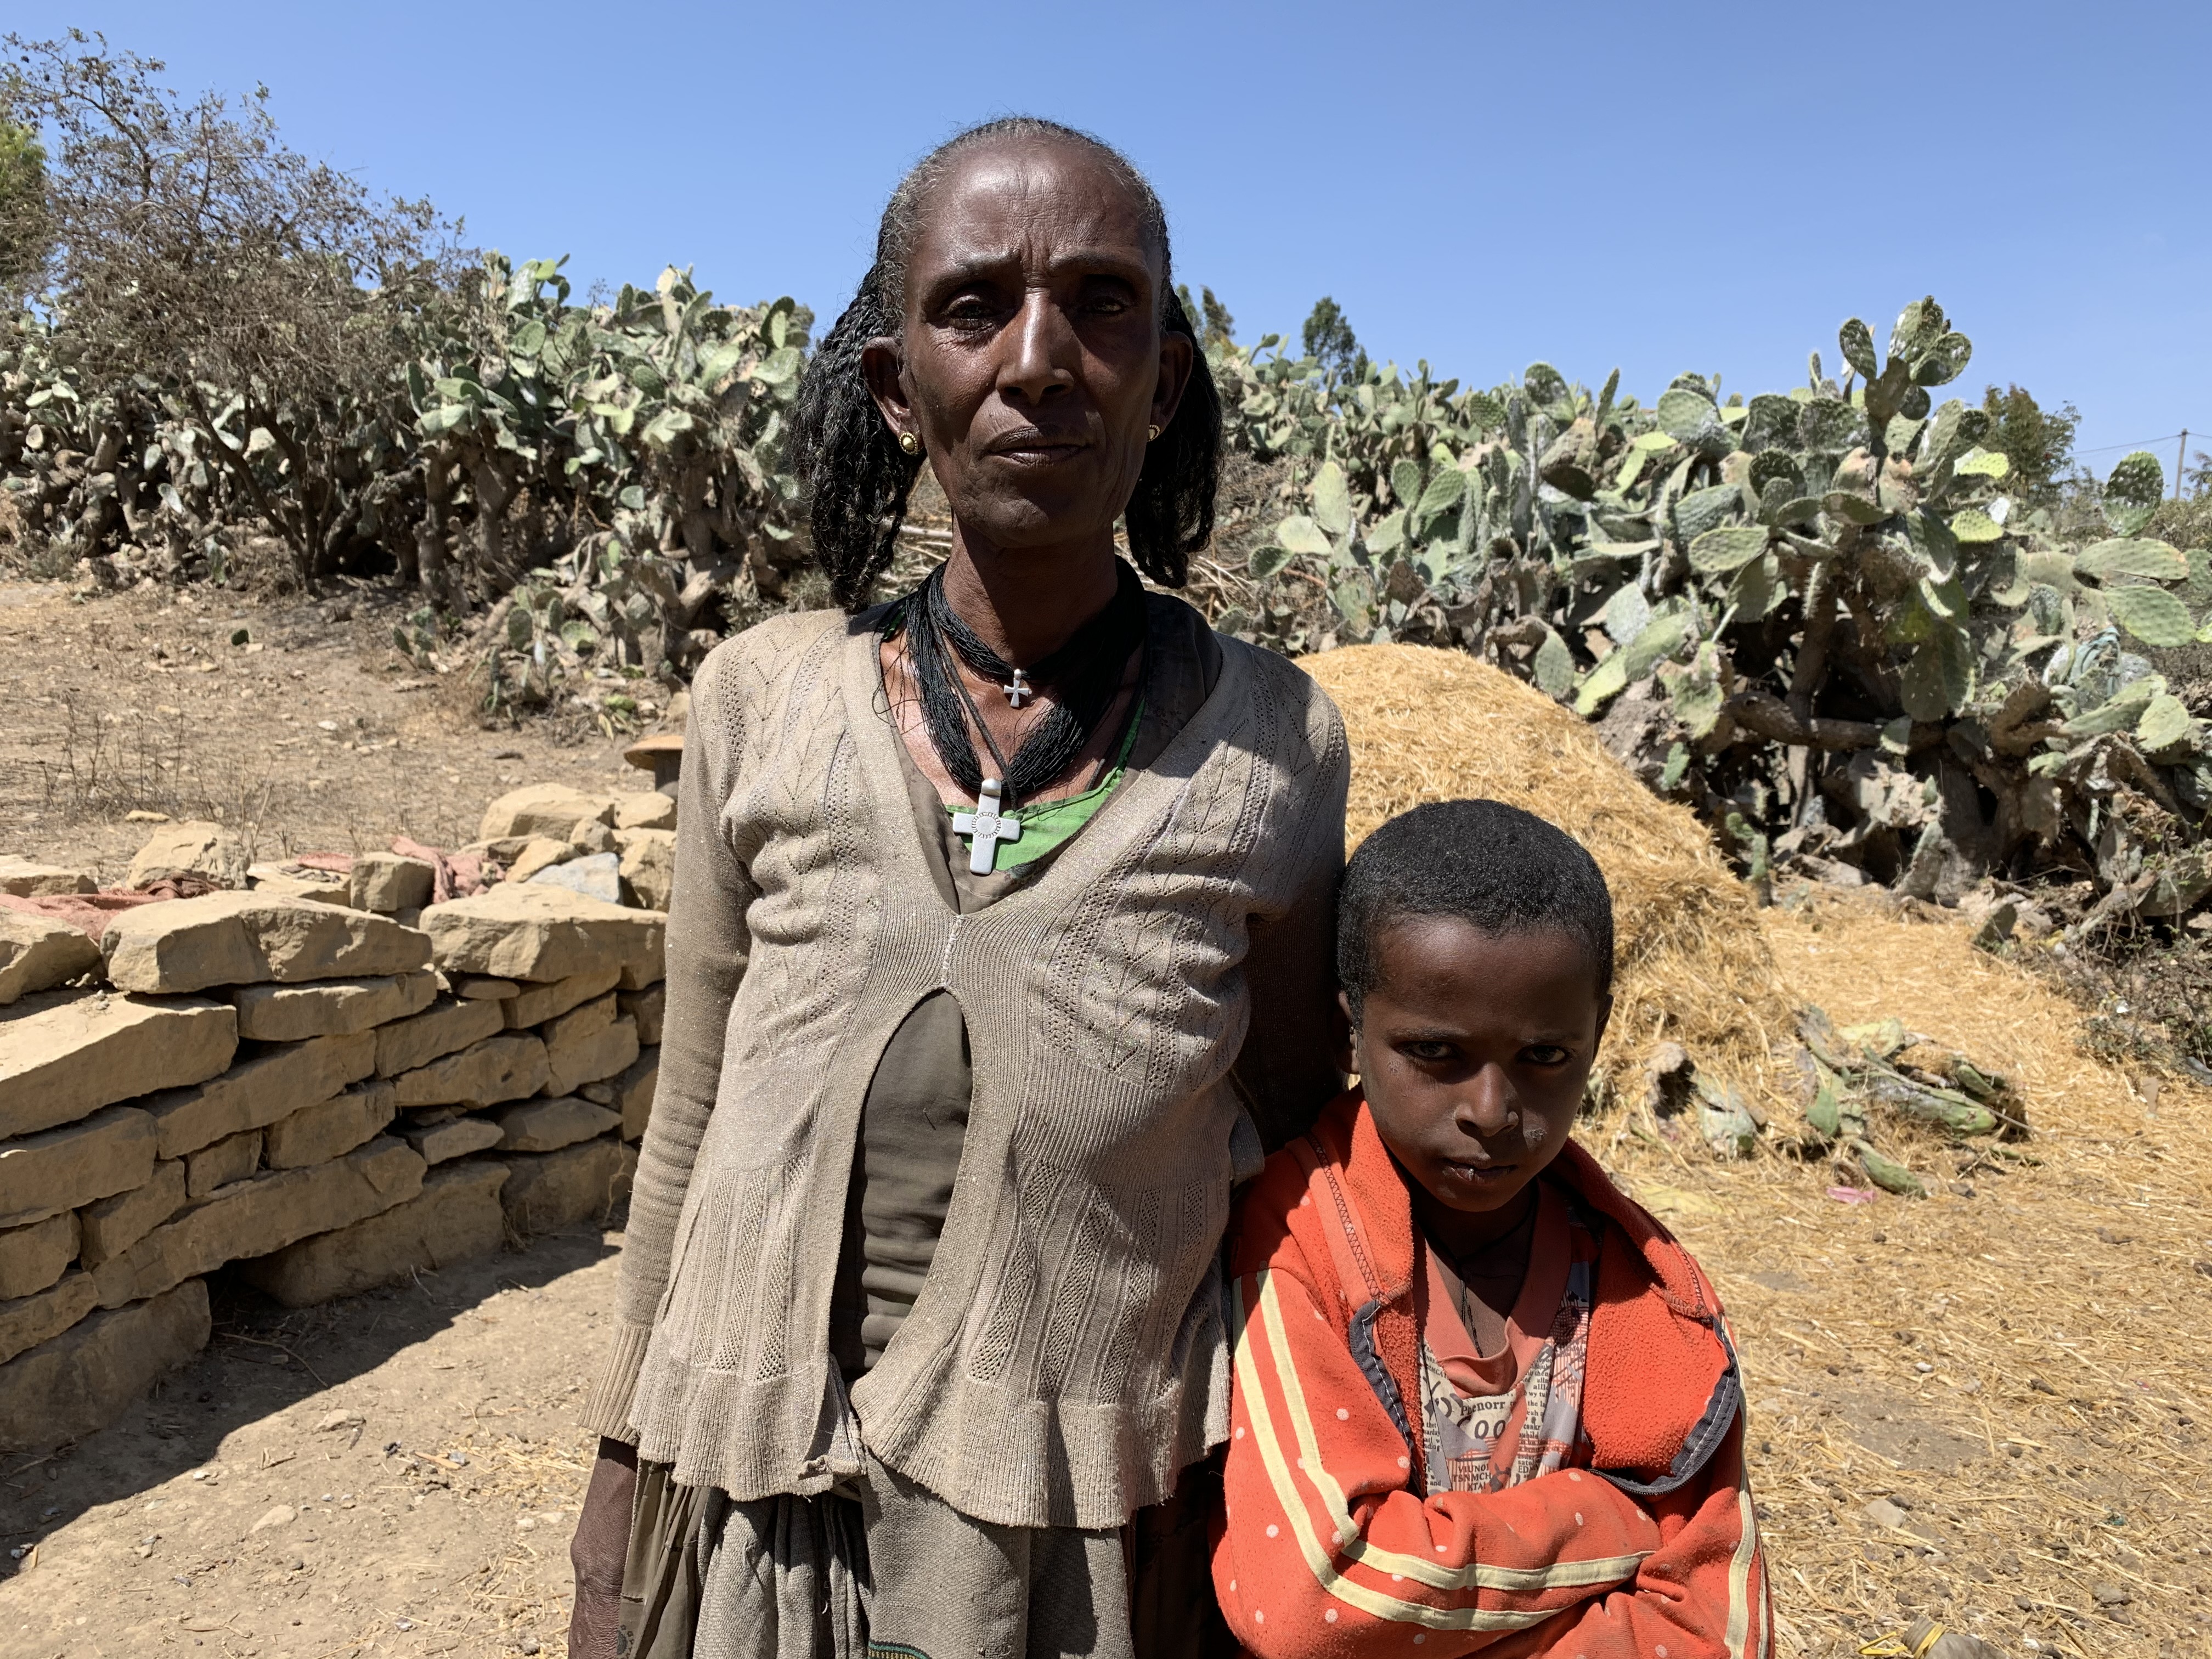 Woman in Tigray, Ethiopia stands outside with her grandson, both having been displaced due to conflict